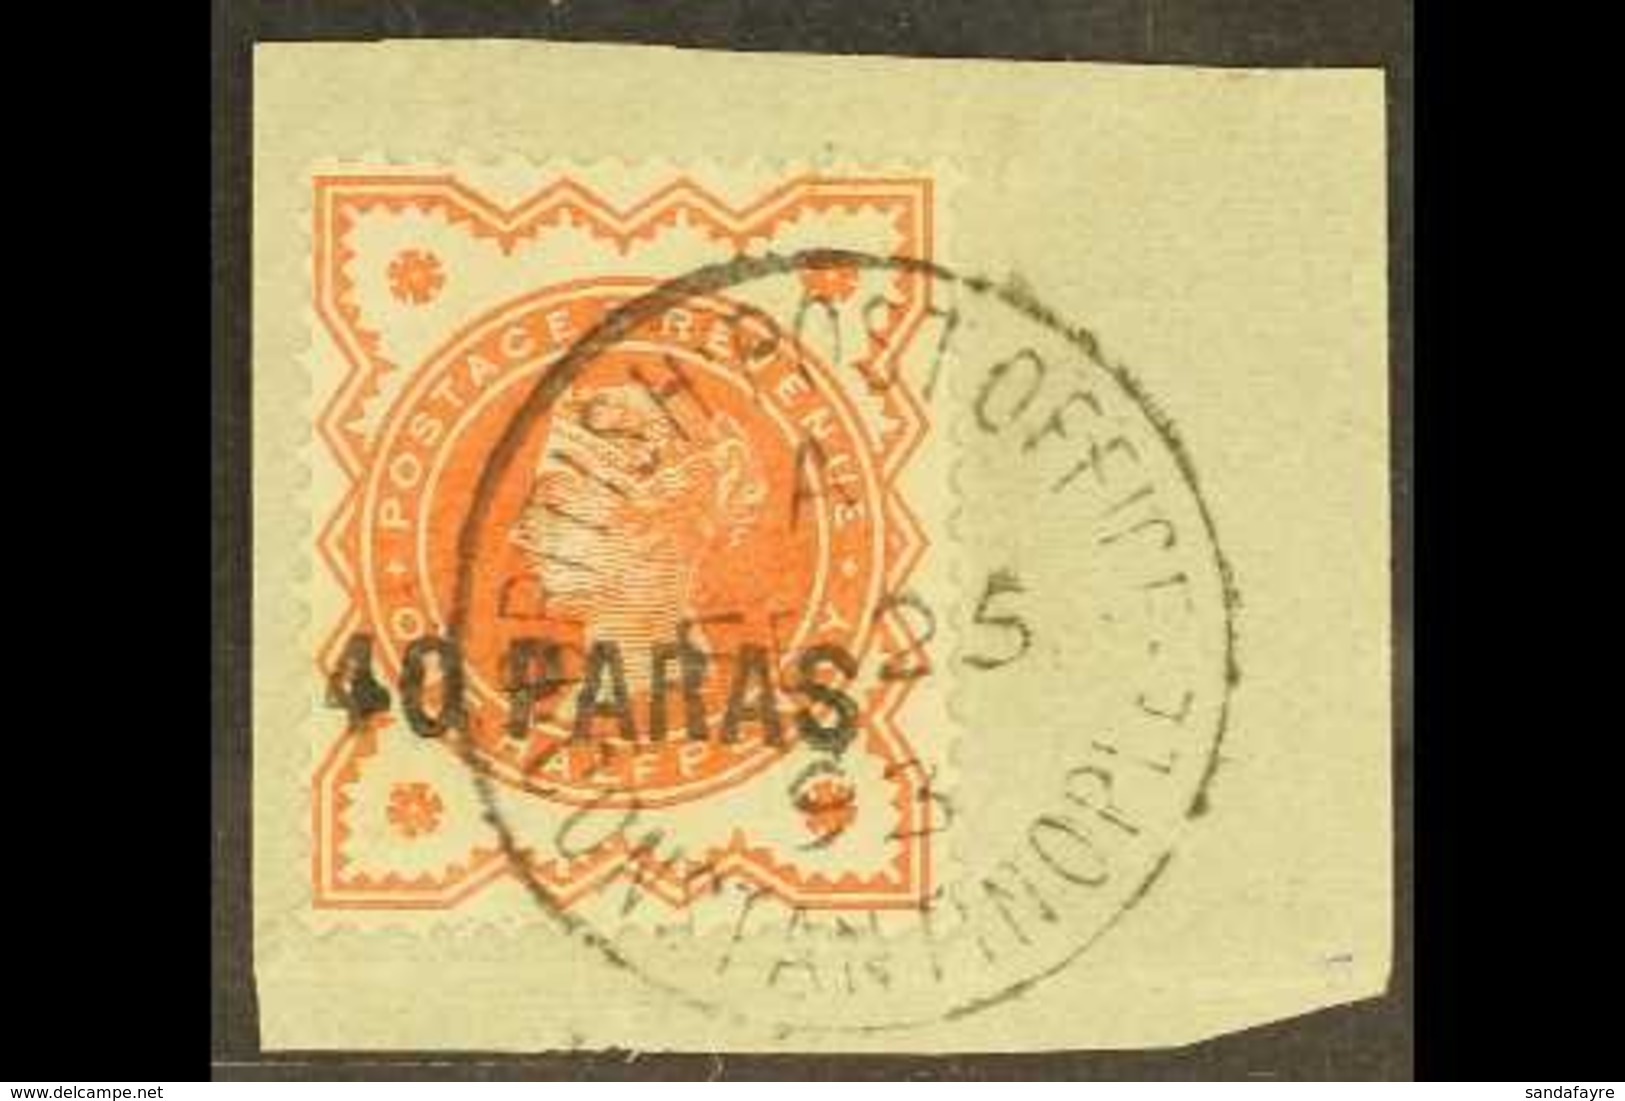 1893 40pa On ½d Vermilion, SG 7, Superb Used On Piece With "full S", Showing Complete Constantinople Fe 25 93 Cds. For M - Levant Britannique